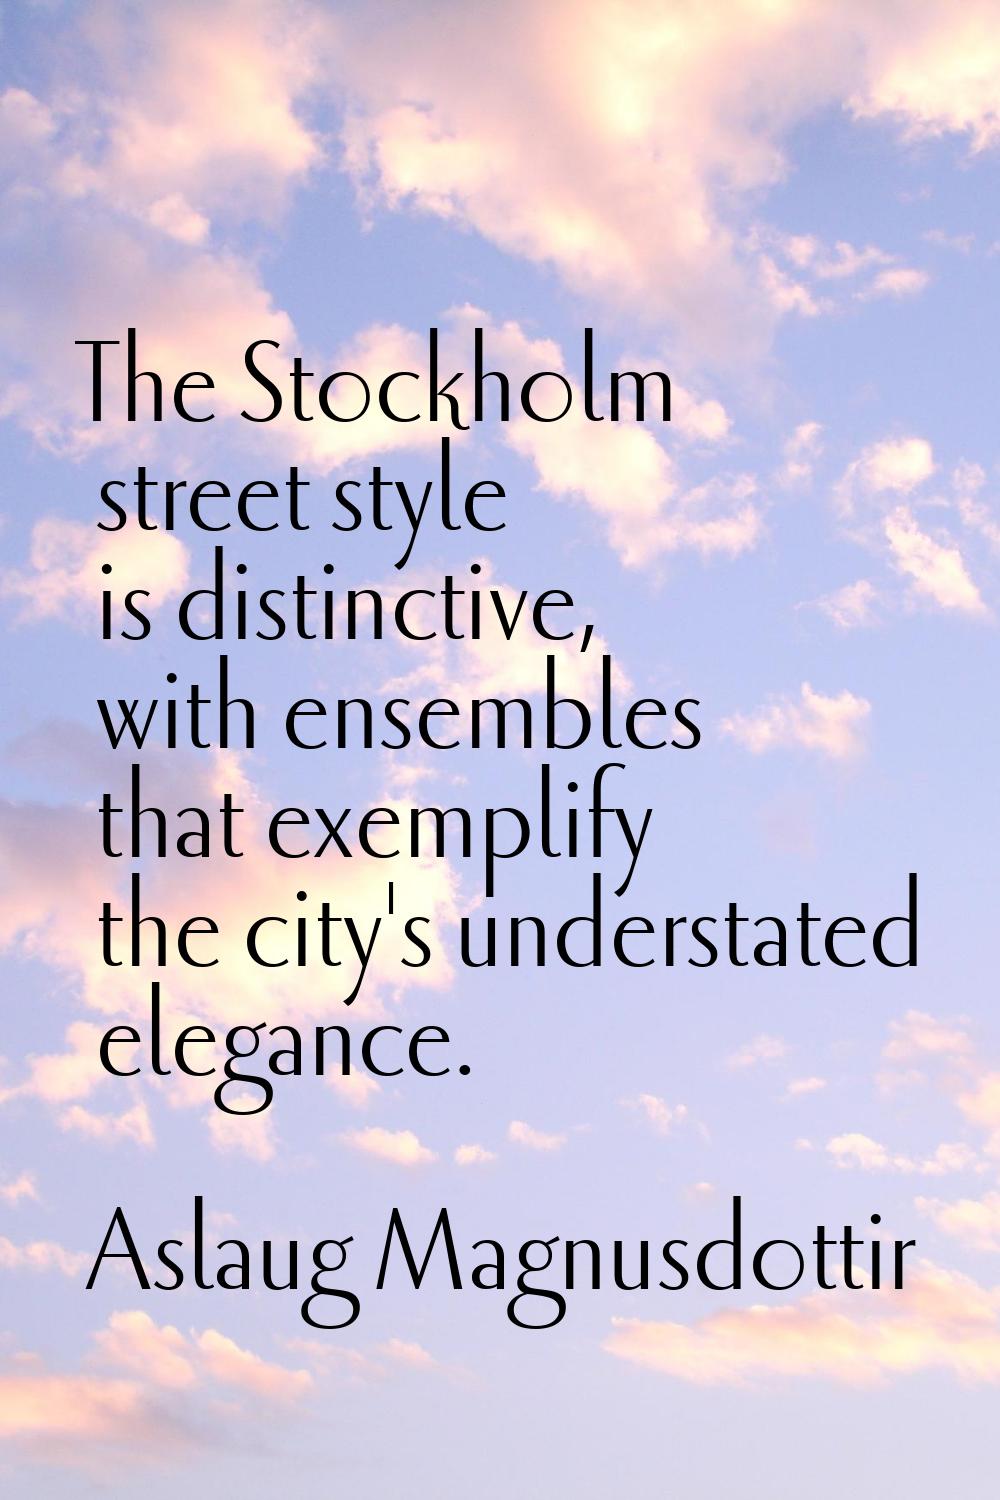 The Stockholm street style is distinctive, with ensembles that exemplify the city's understated ele